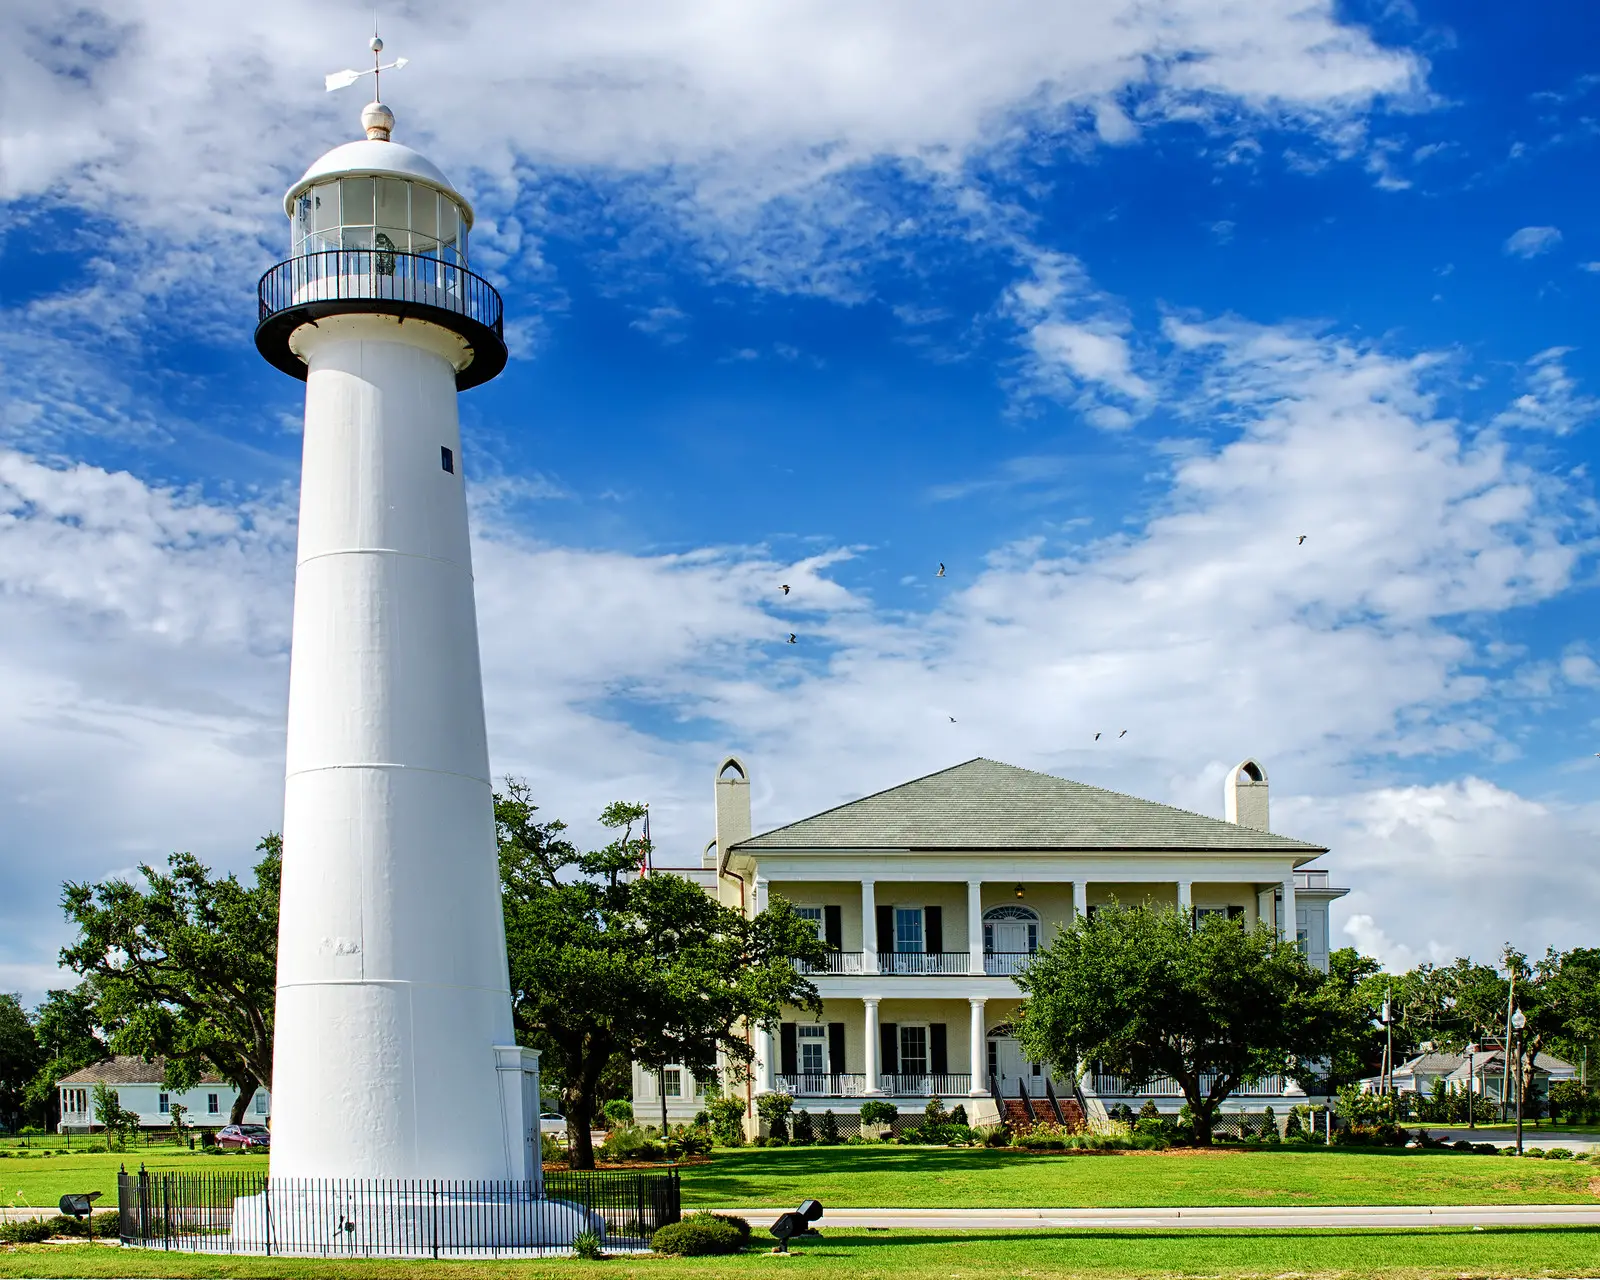 Bright blue skies with bright white clouds, green grass and the historic landmark lighthouse with the welcome back center in the background in Biloxi